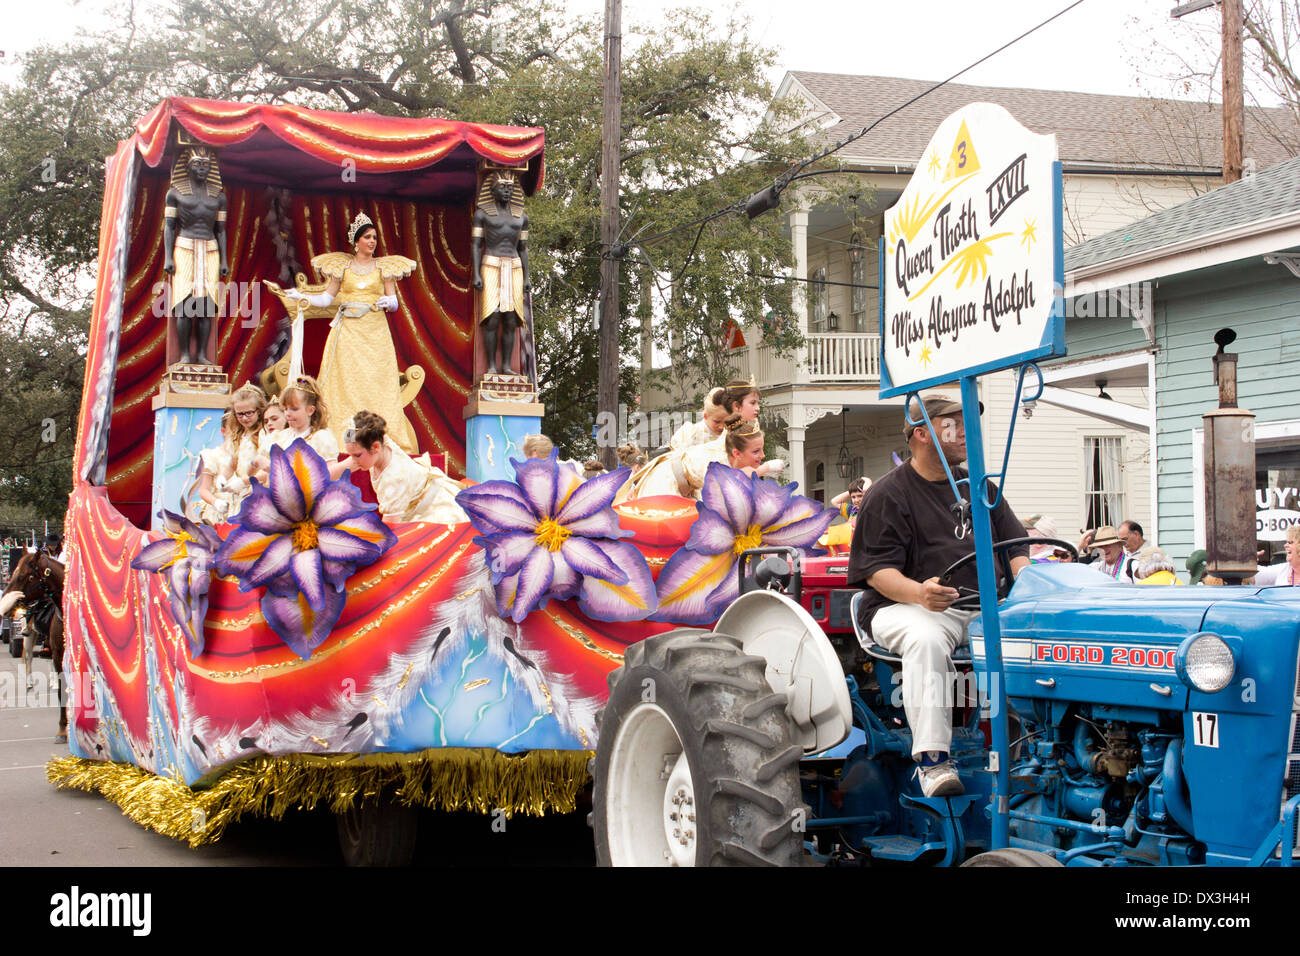 Queen of Thoth on her parade float in Uptown New Orleans Stock Photo